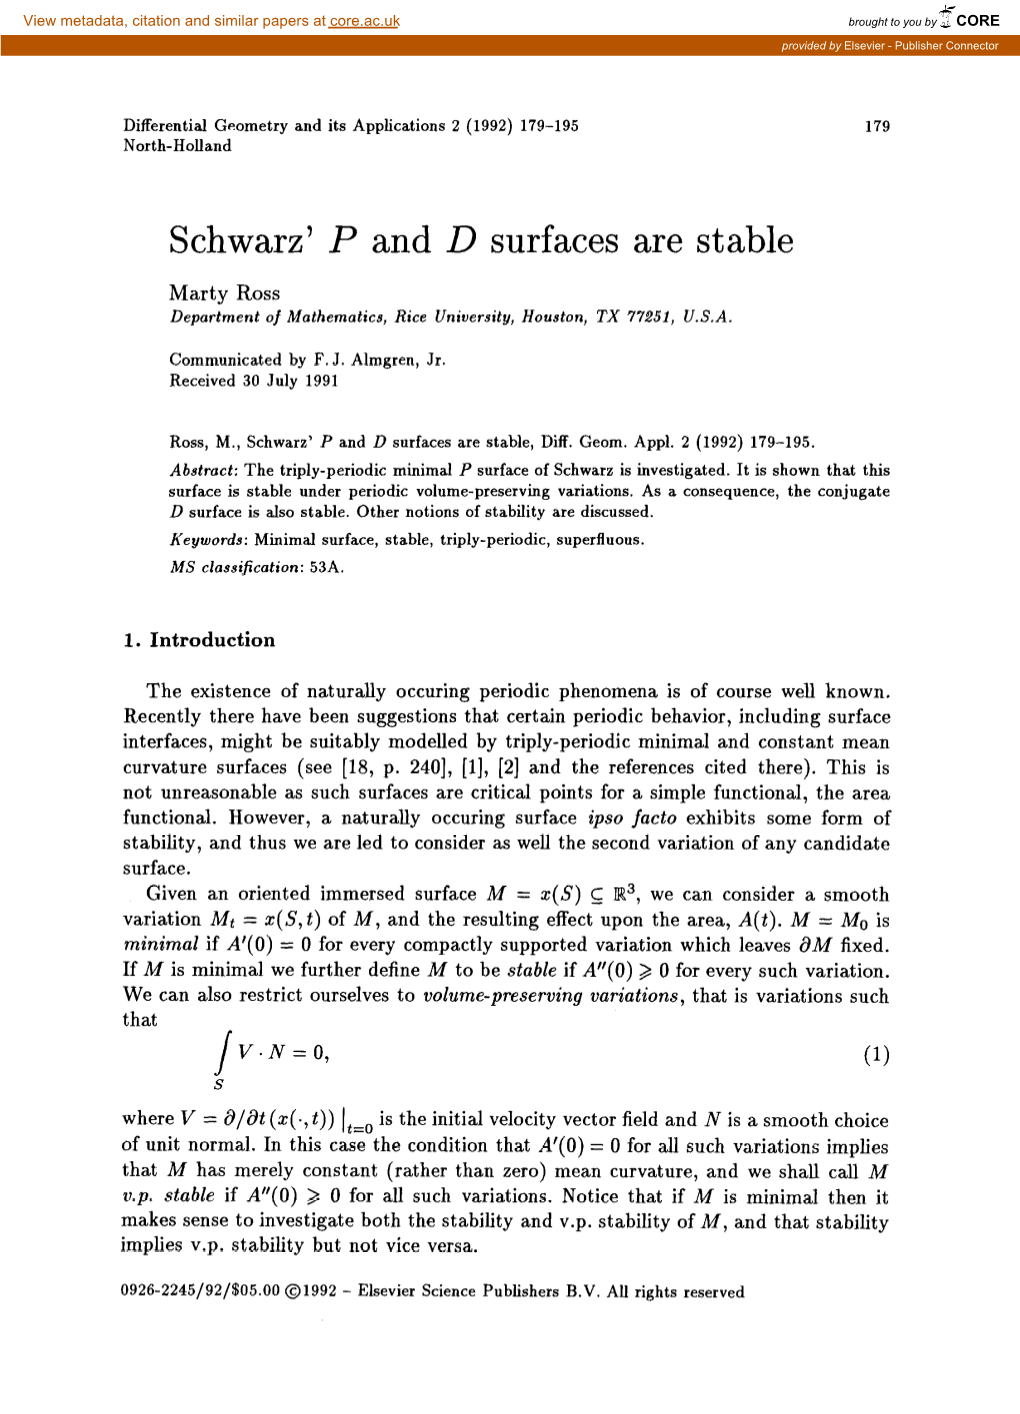 Schwarz' P and D Surfaces Are Stable